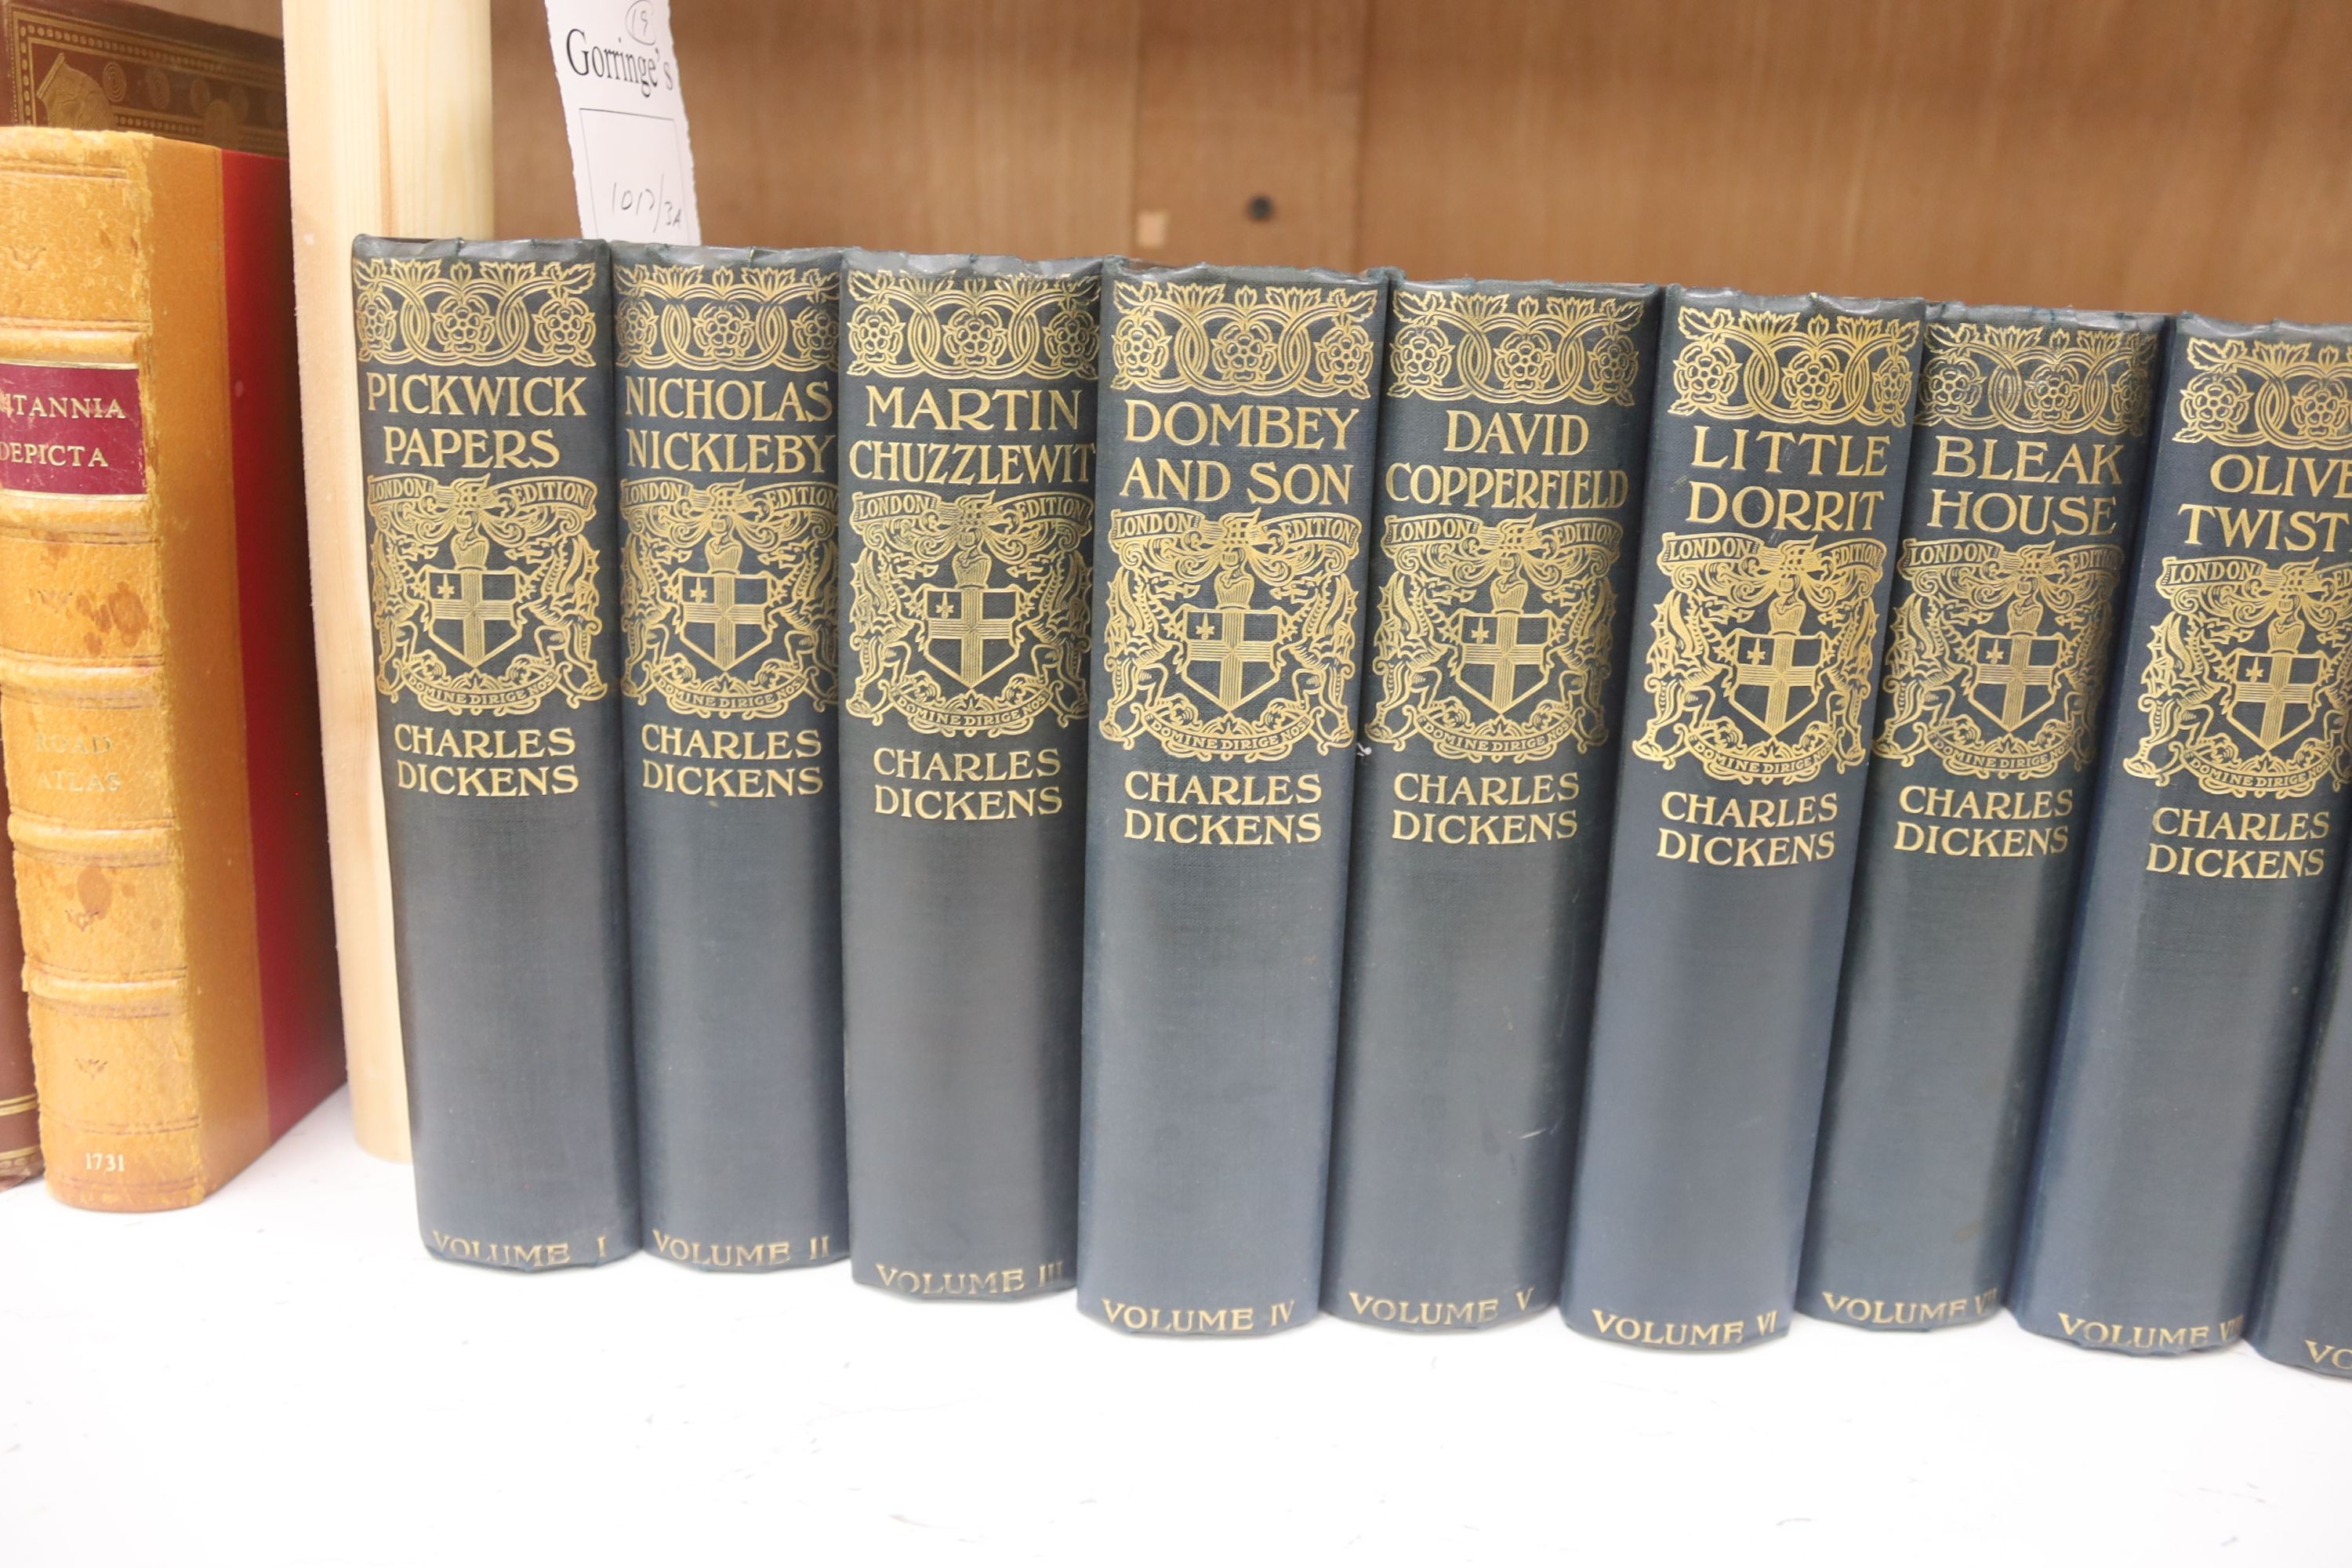 Dickens, Charles - The Works, 12 vols, blue cloth gilt, illustrations by ‘’Phiz’’, Seymour, and others, Blackwood, Le Bas & Co., [c.1900]; Hueffer, Ford, Maddox - The Cinque Ports, illustrated by William Hyde, qto, cloth